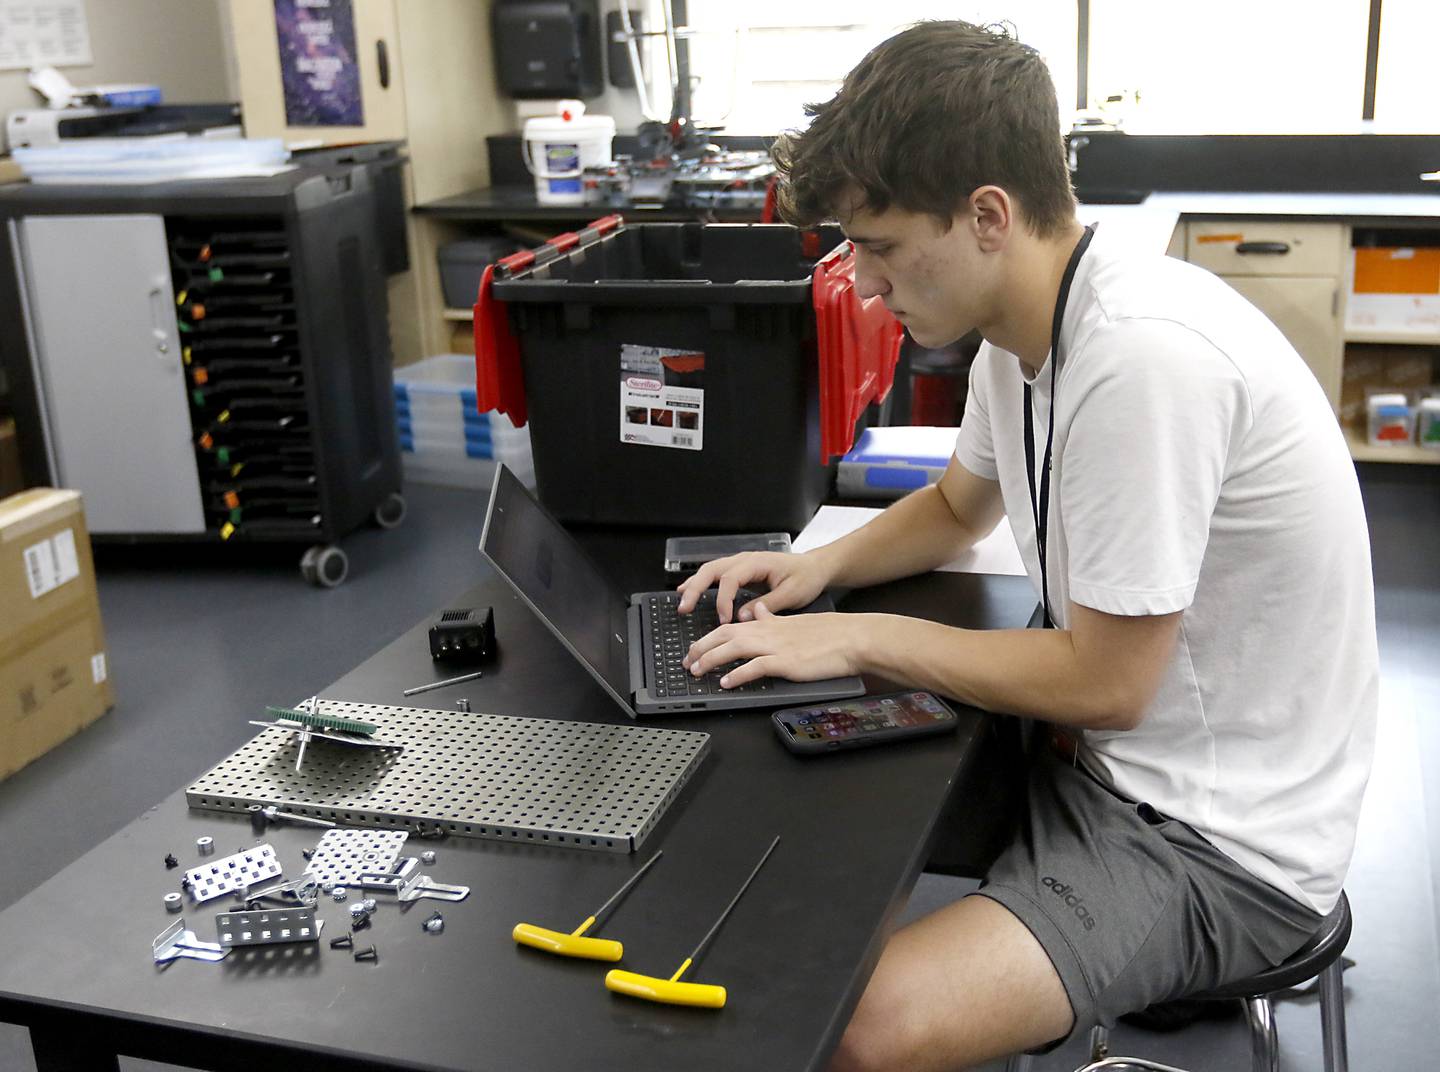 Huntley student Jack Breunig documents his robotics project Thursday, May 18, 2023 during class at Huntley High School. Huntley Community School District 158 has been recognized as a 2023 Spring “Lighthouse System” by AASA, The School Superintendents Association, to serve as a model of positive change in public education. It is one of six school districts from across the country to receive the award.